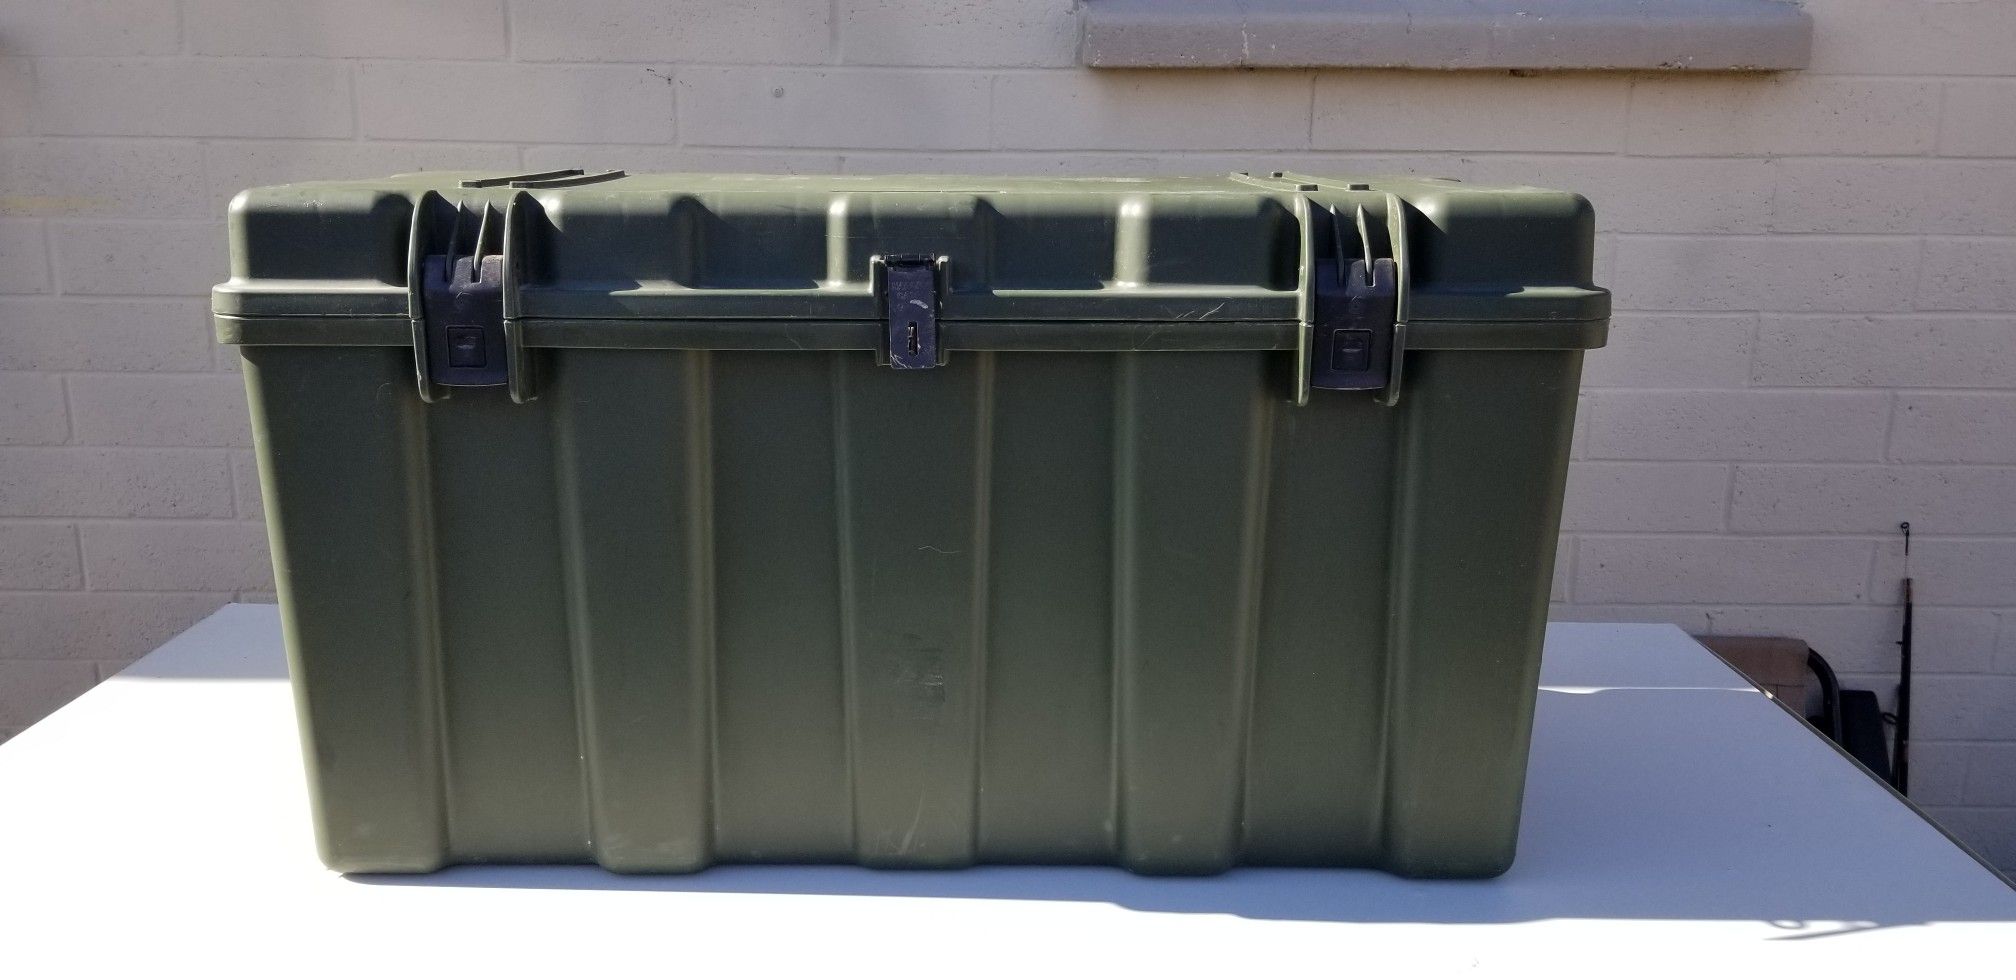 Pelican Hardigg TL500i military spec foot locker storage case container.  Inside Dimensions: 32.88 x 15.0 x 17.75 Outside Dimensions: 36.27 x 18.5 x  for Sale in San Antonio, TX - OfferUp